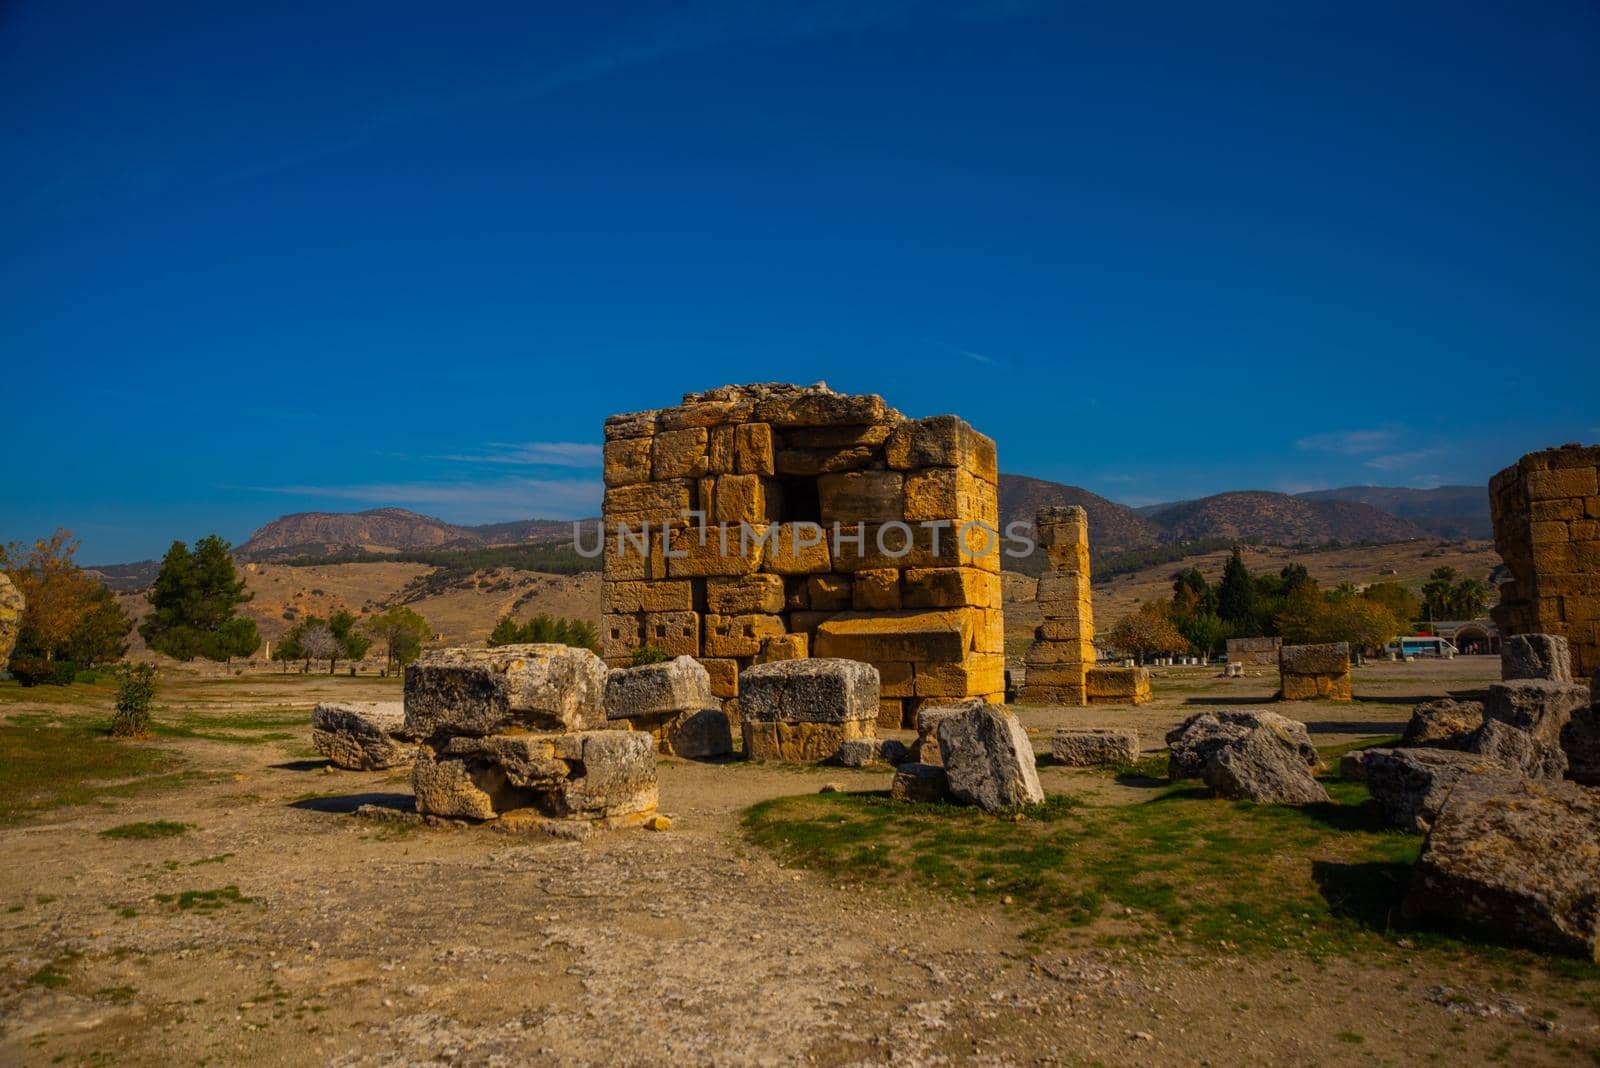 PAMUKKALE, DENIZLI, TURKEY: Ruins of the ruined city of Hierapolis in Pamukkale on a sunny day.